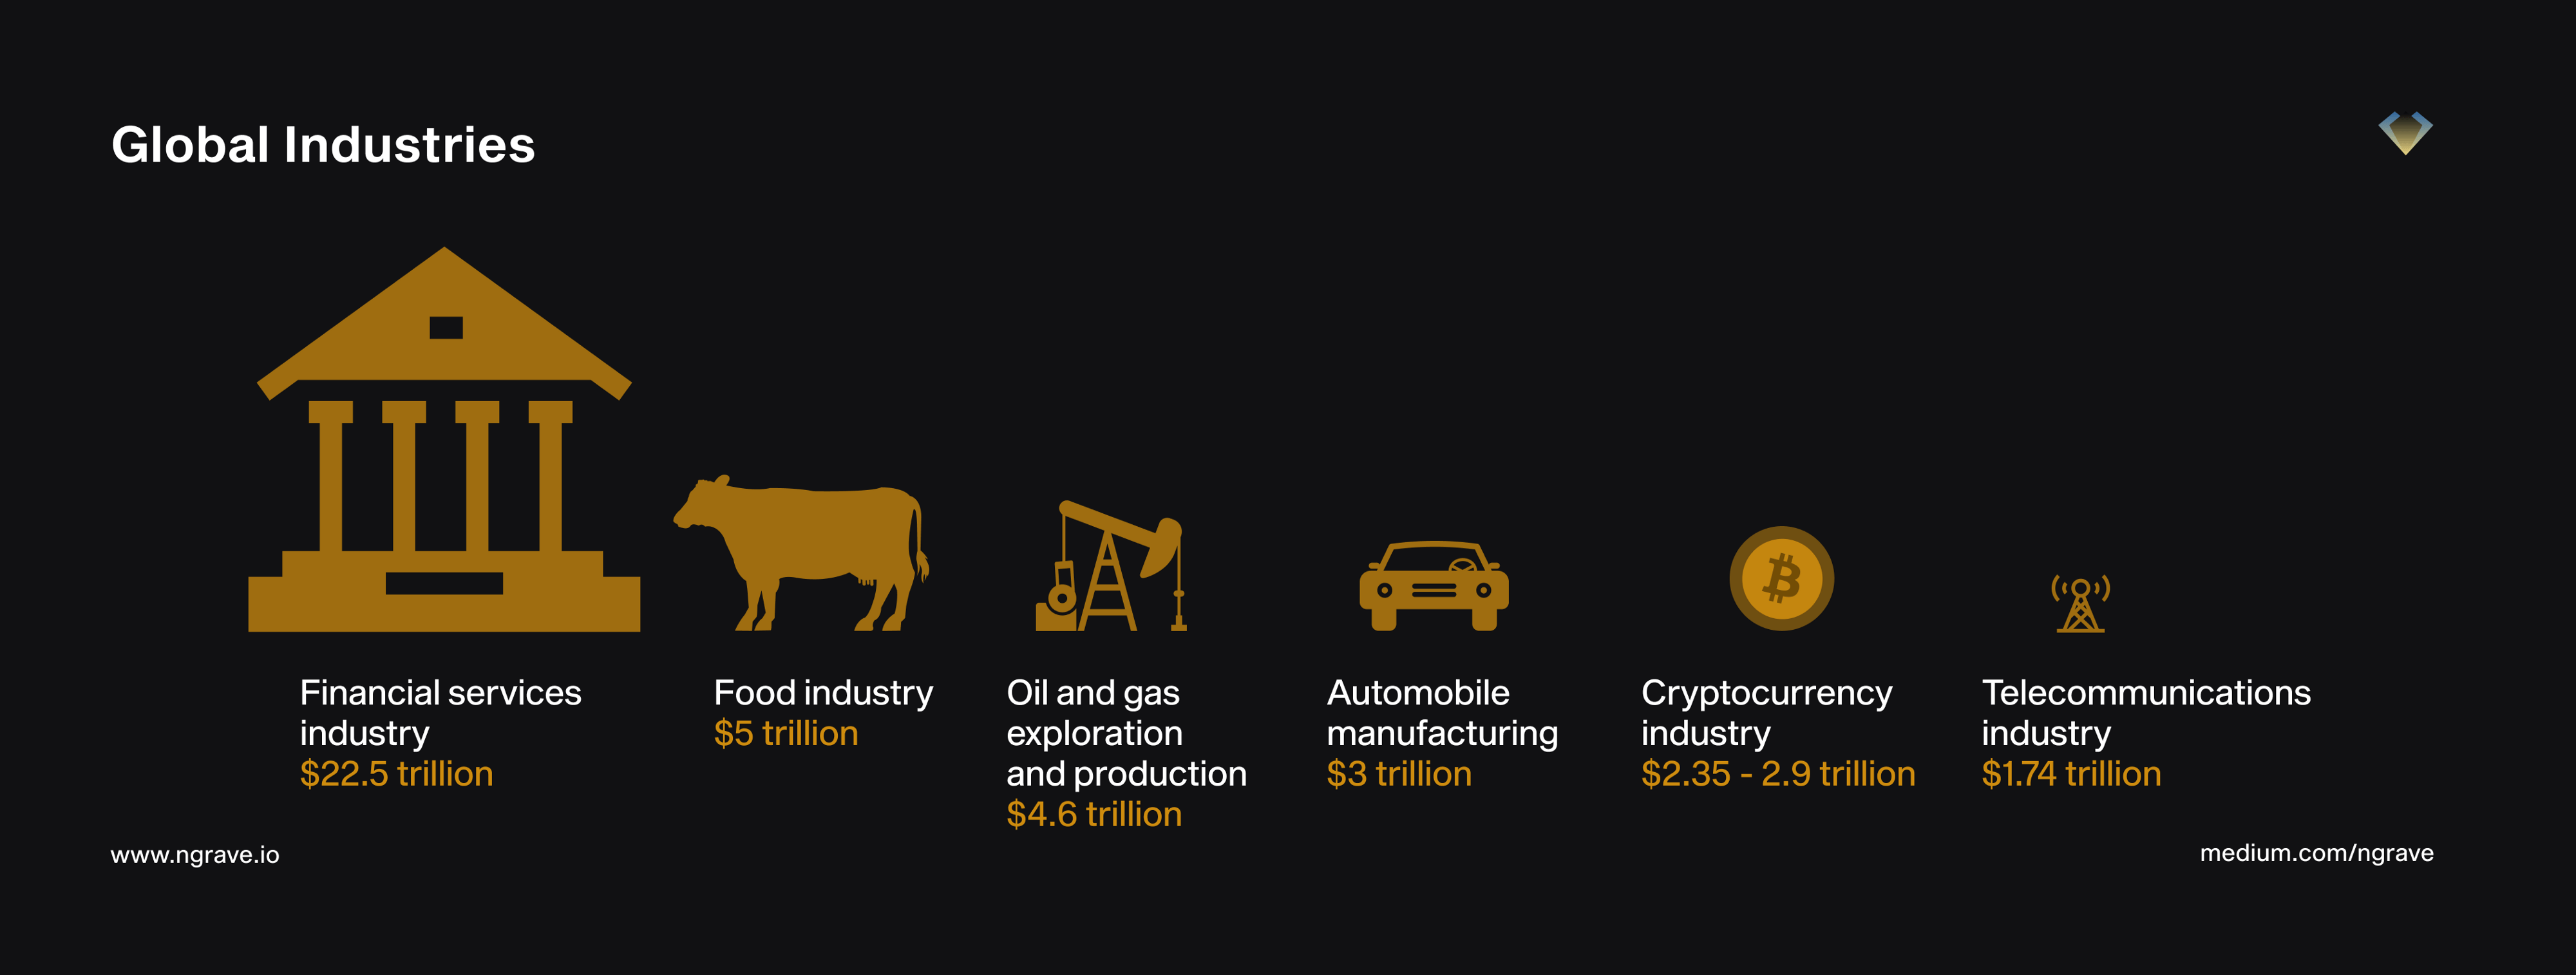 Crypto industry vs global industries (NGRAVE)